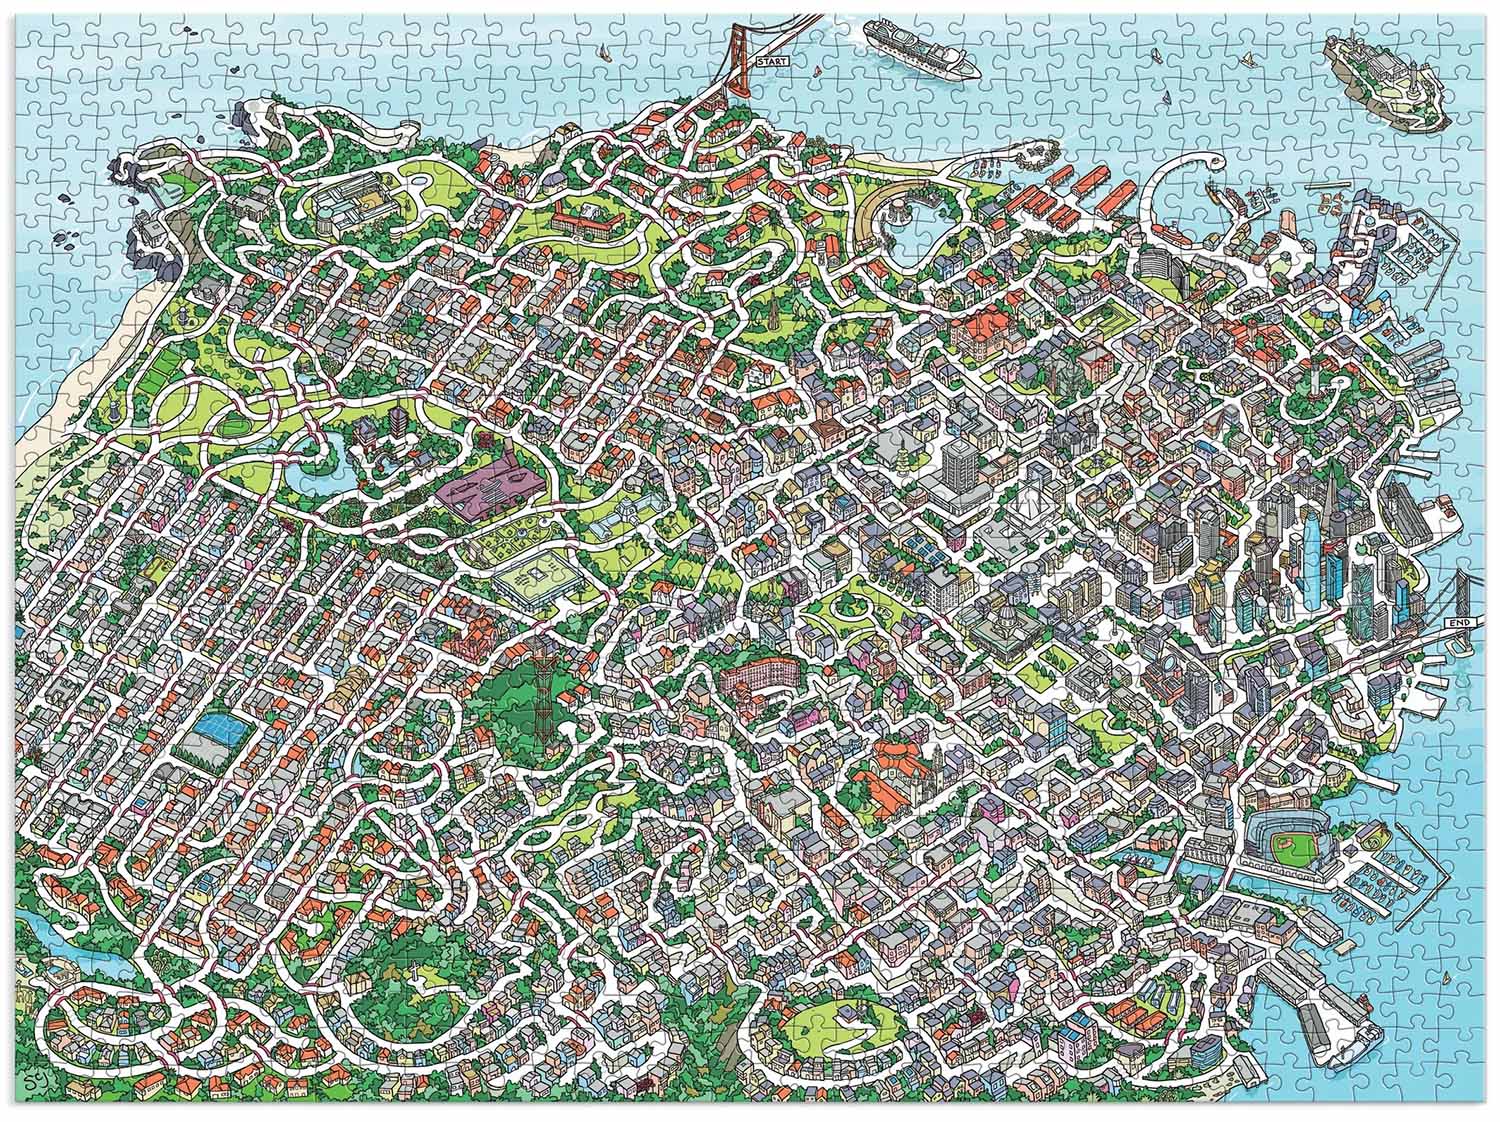 The City by the Bay Maze Puzzle Maps & Geography Jigsaw Puzzle